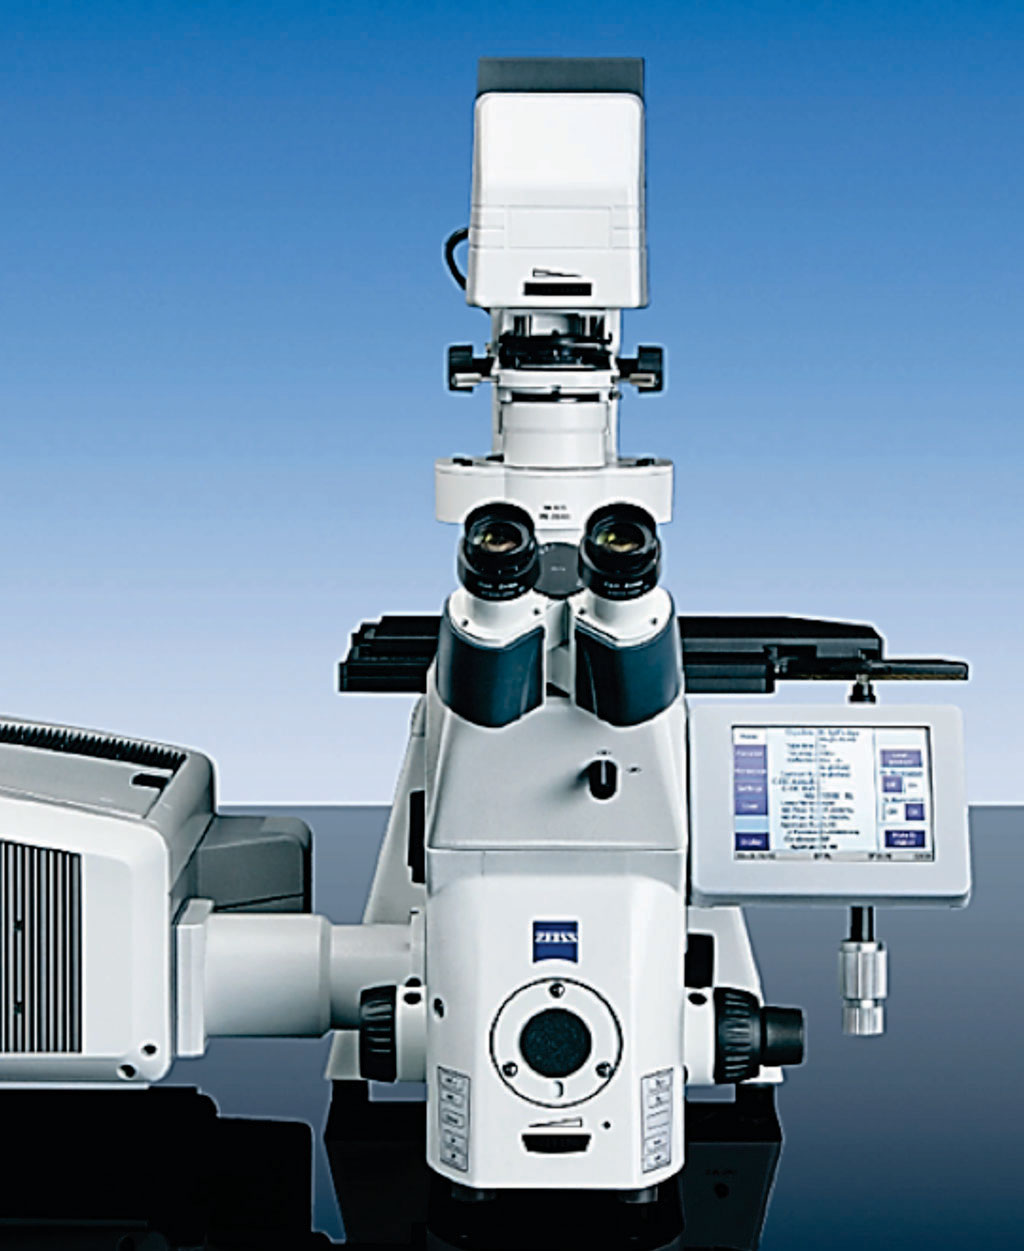 Image: The LSM 780 laser scanning confocal microscope (Photo courtesy of Zeiss).